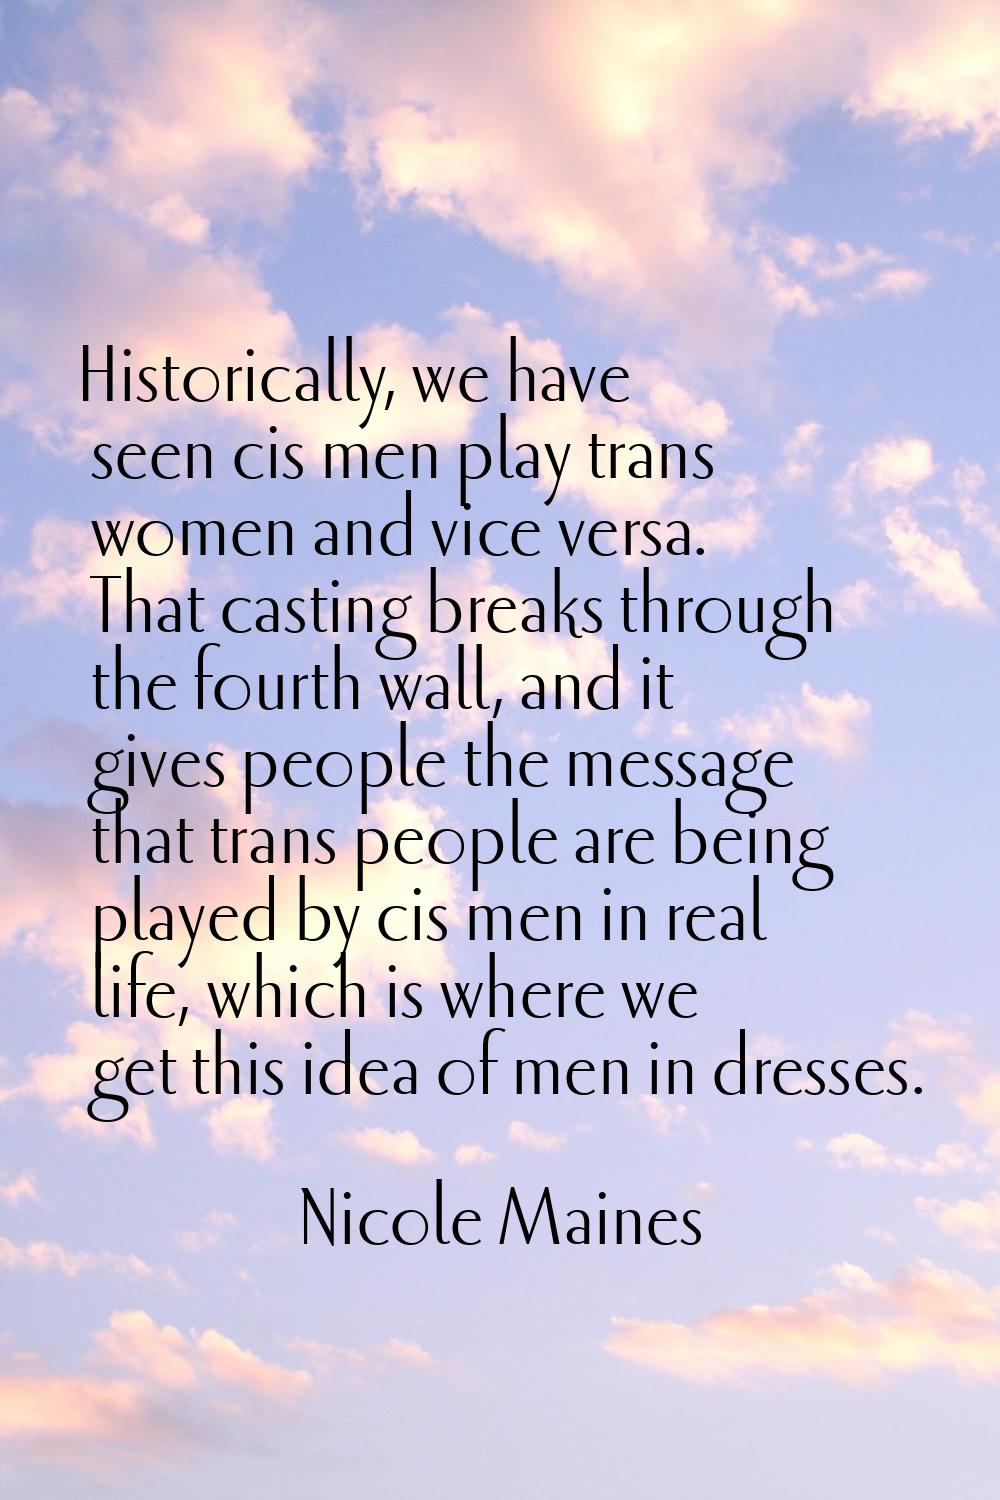 Historically, we have seen cis men play trans women and vice versa. That casting breaks through the